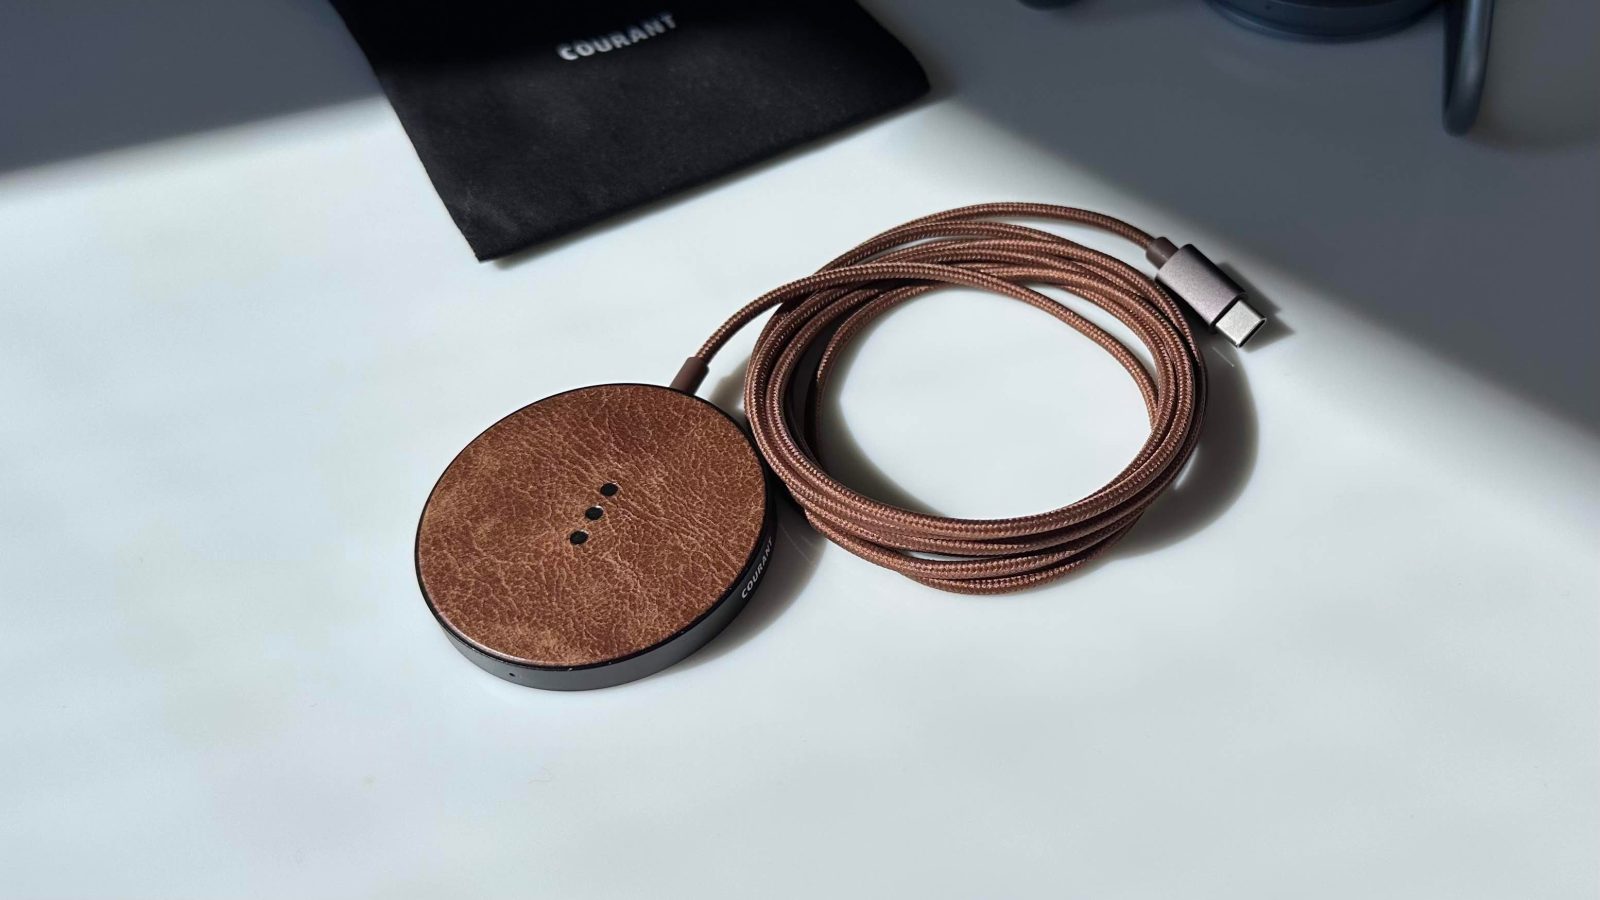 Courant MAG:1 leather MagSafe charger review